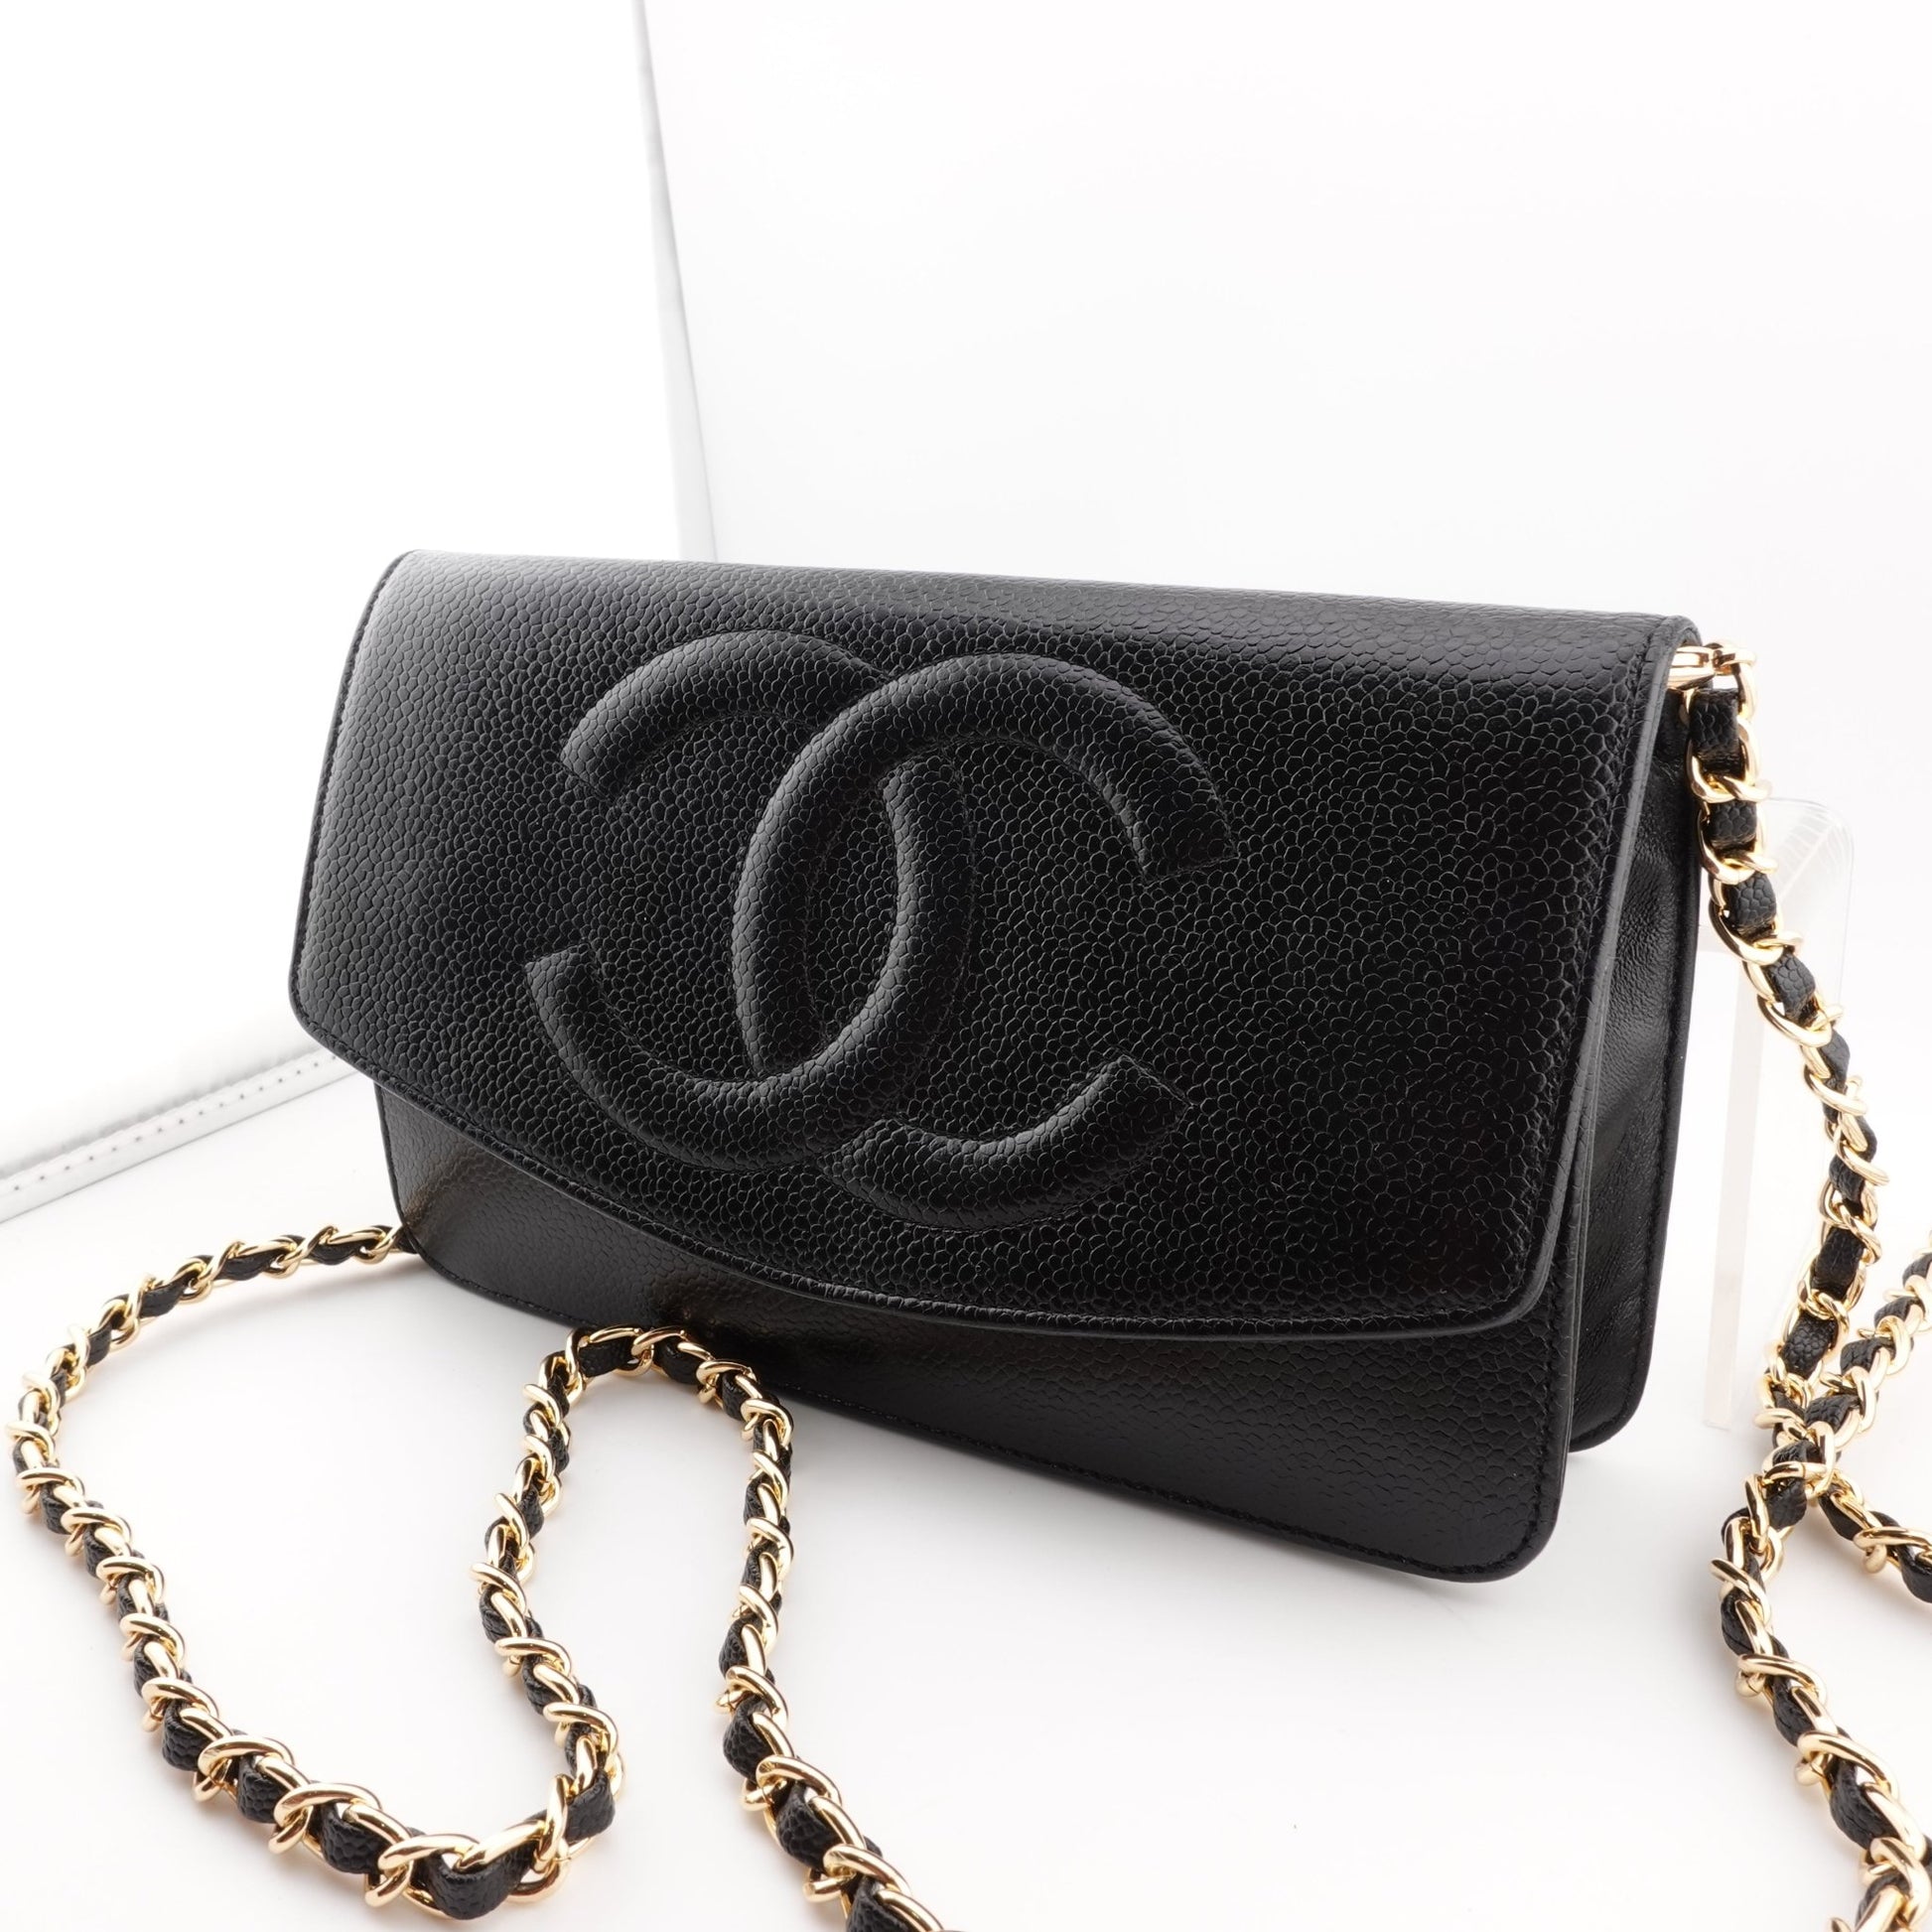 CHANEL Caviar Leather Timeless Wallet on Chain - Bag Envy